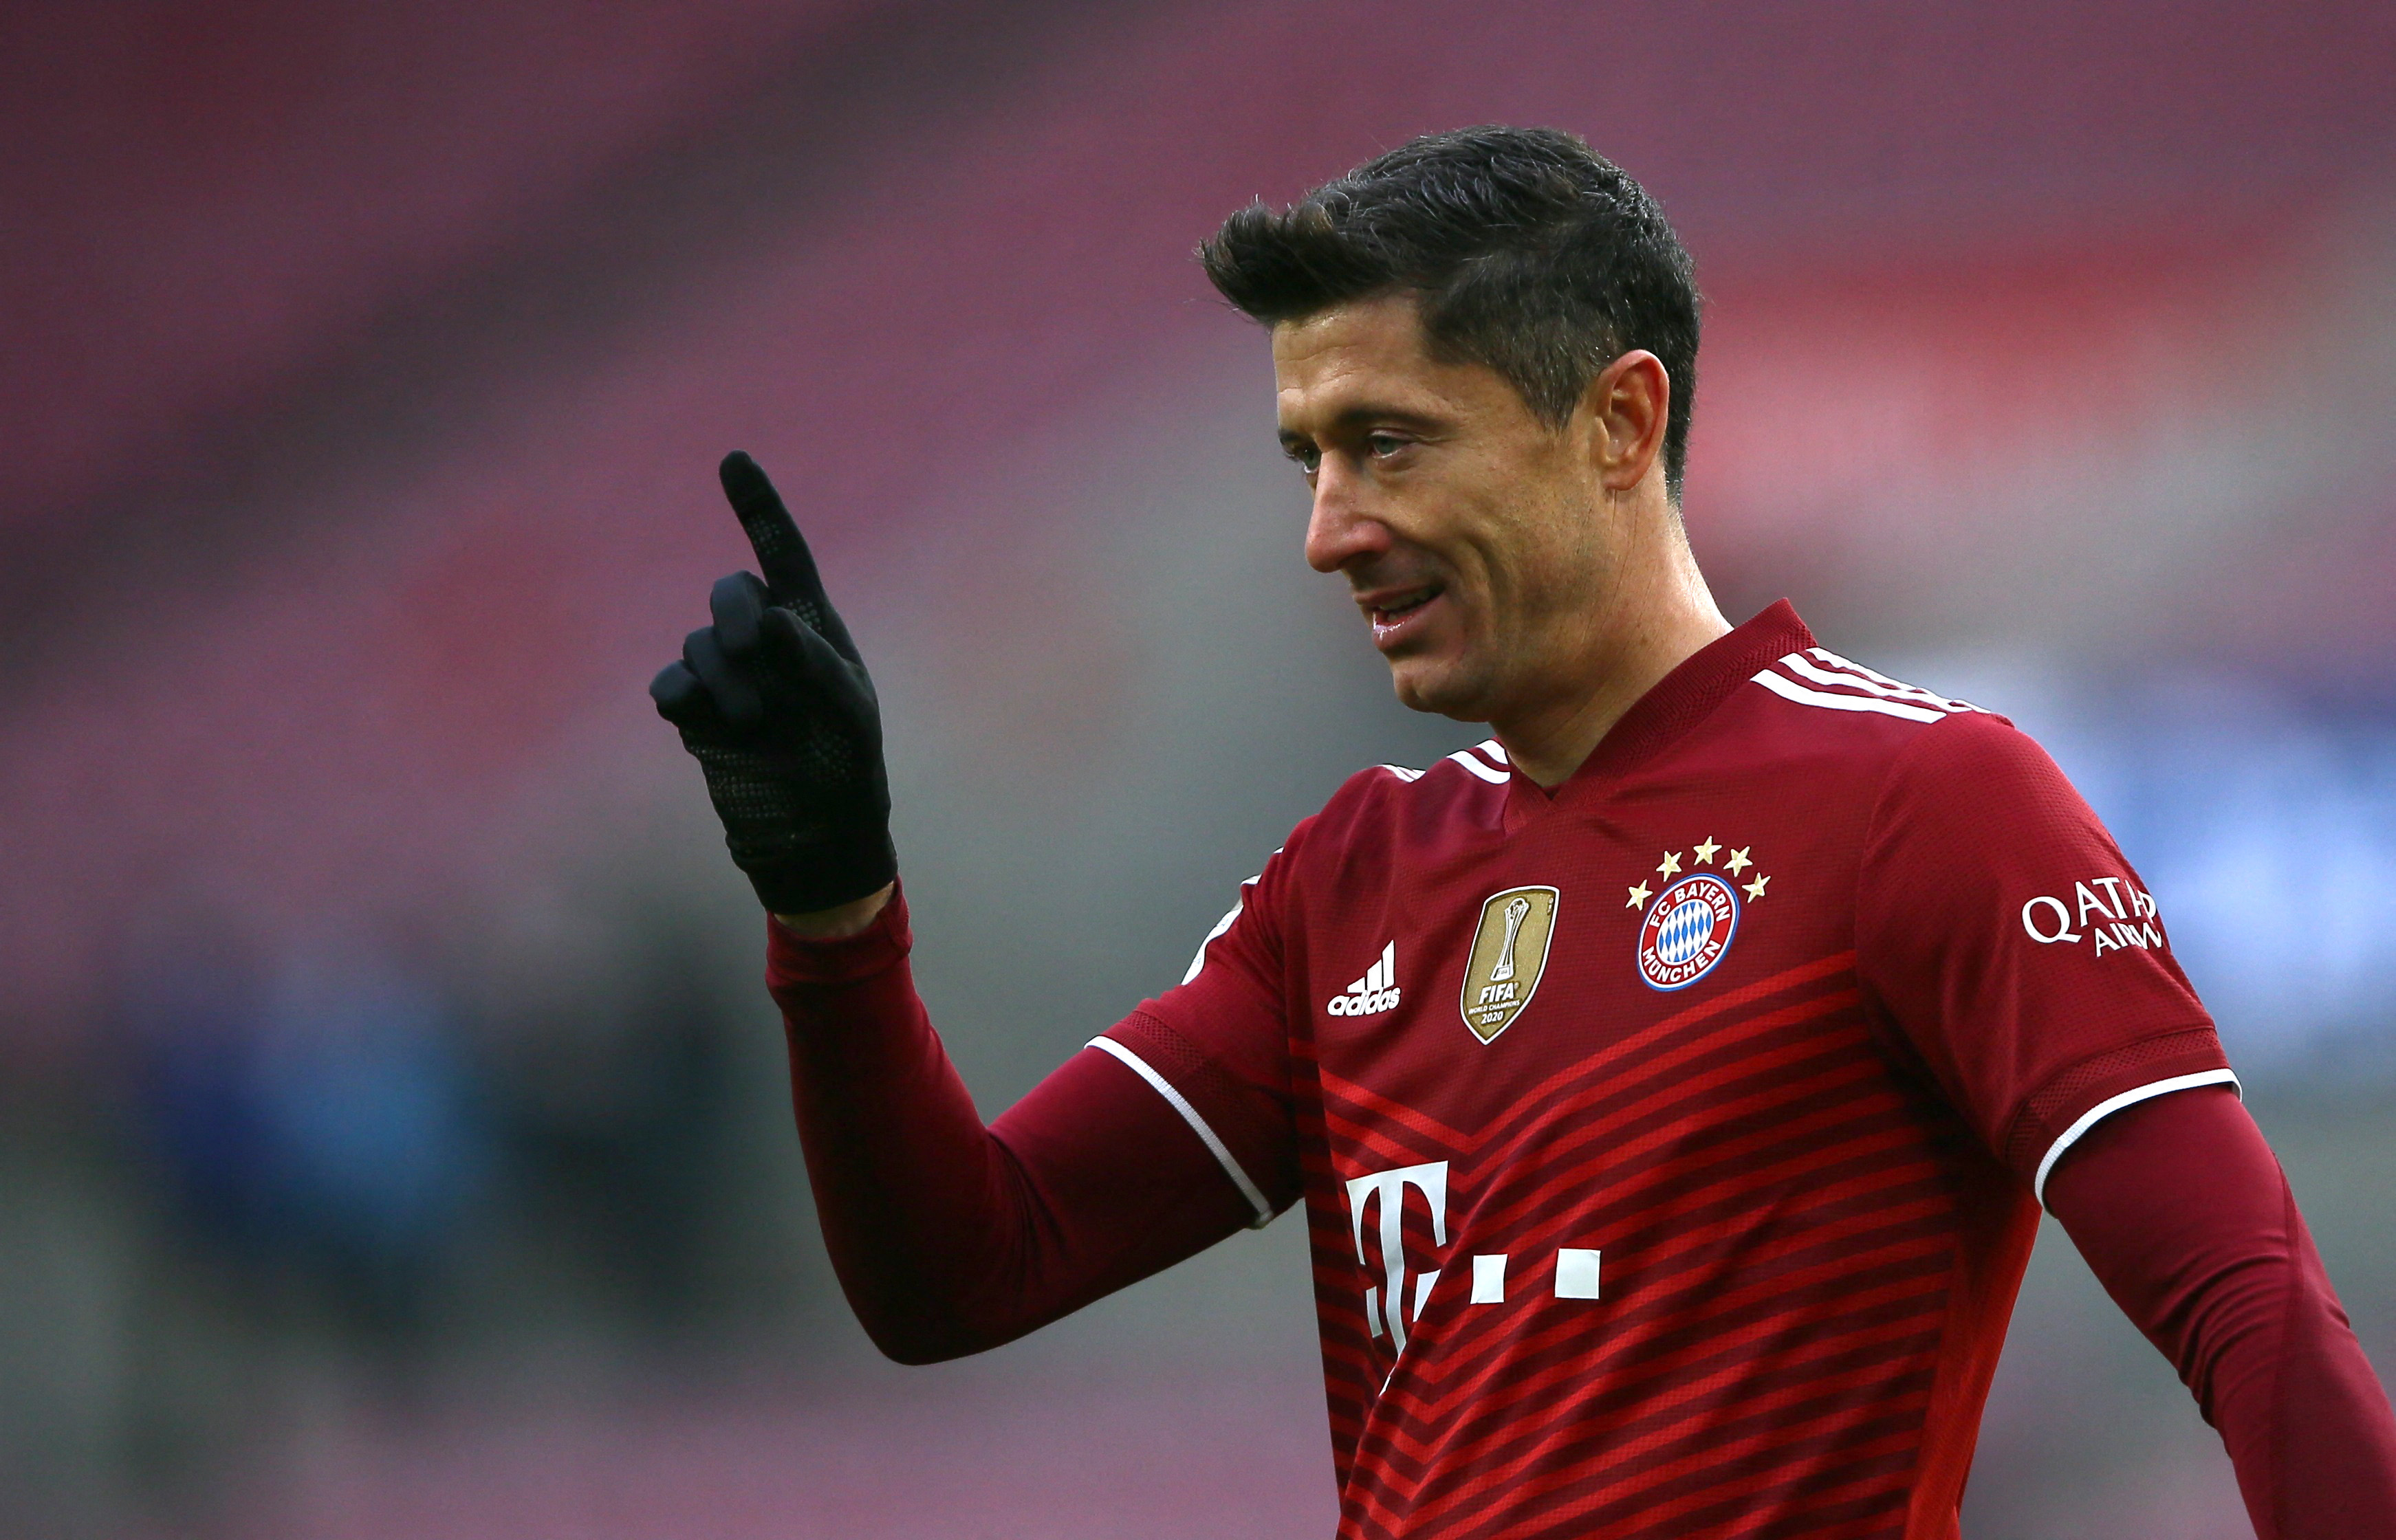 Soccer Football - Bundesliga - FC Cologne v Bayern Munich - RheinEnergieStadion, Cologne, Germany - January 15, 2022 Bayern Munich's Robert Lewandowski gestures as he scores their first goal that is later awarded after a VAR review REUTERS/Thilo Schmuelgen DFL REGULATIONS PROHIBIT ANY USE OF PHOTOGRAPHS AS IMAGE SEQUENCES AND/OR QUASI-VIDEO.